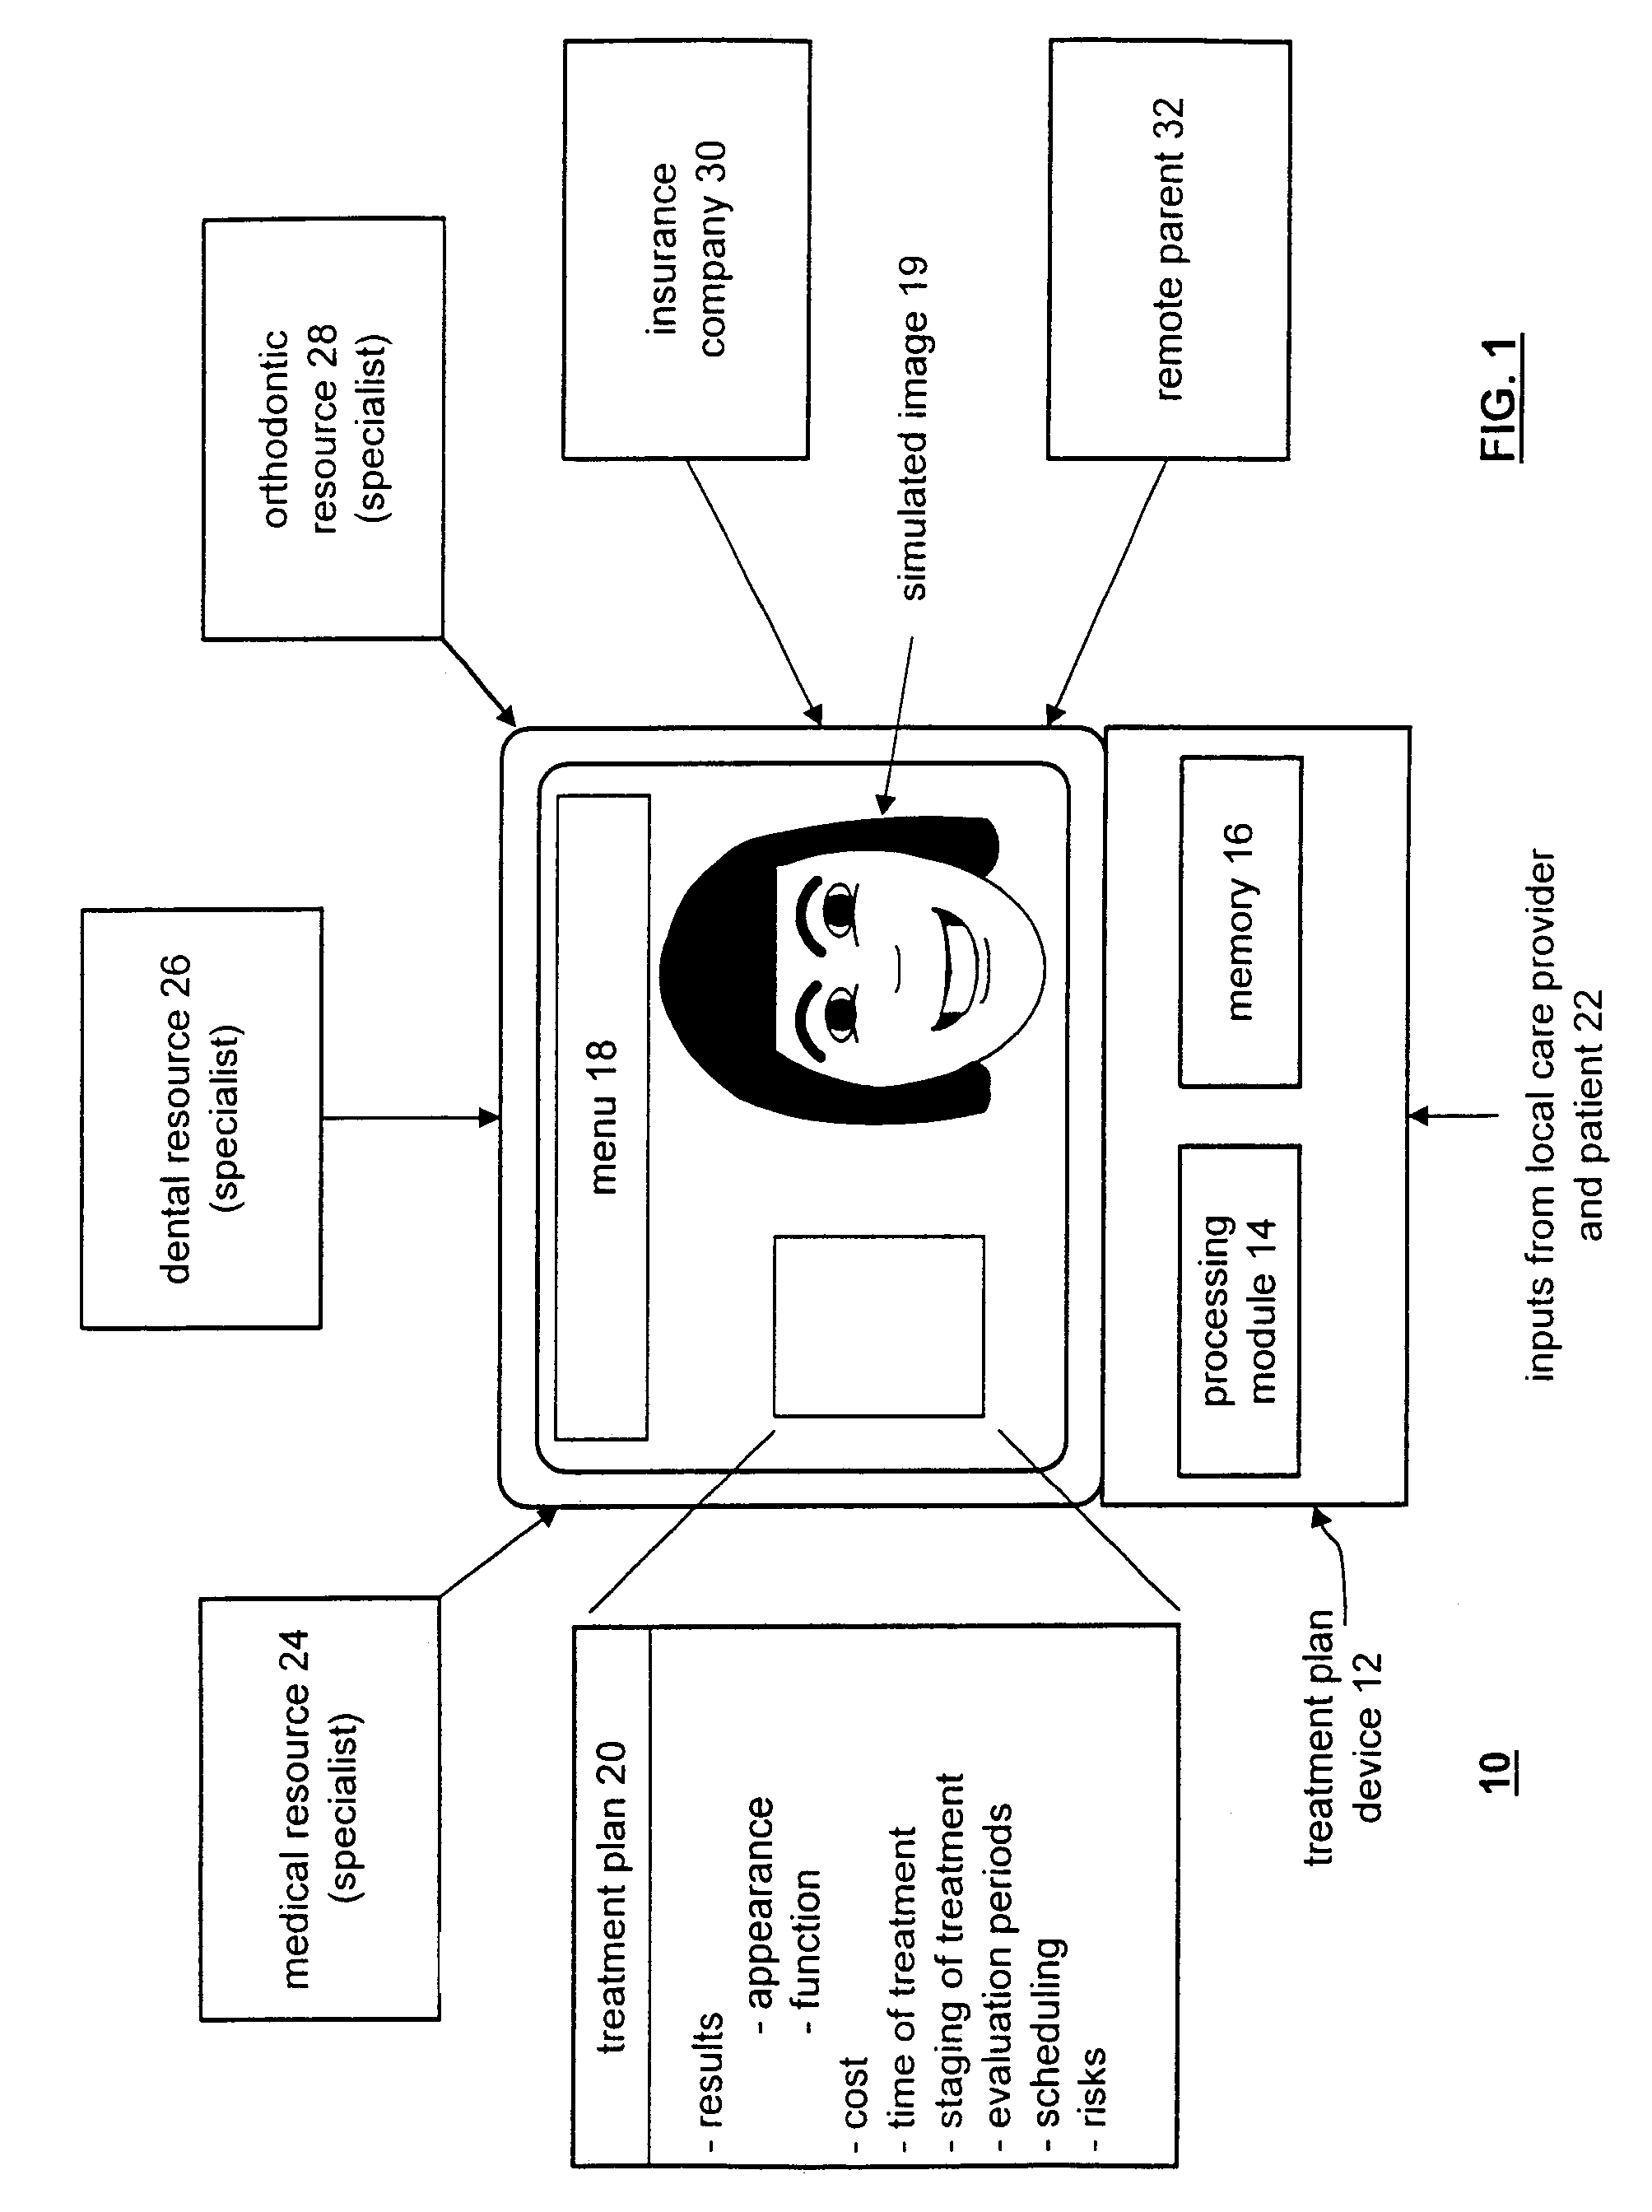 Method and apparatus for automated generation of a patient treatment plan